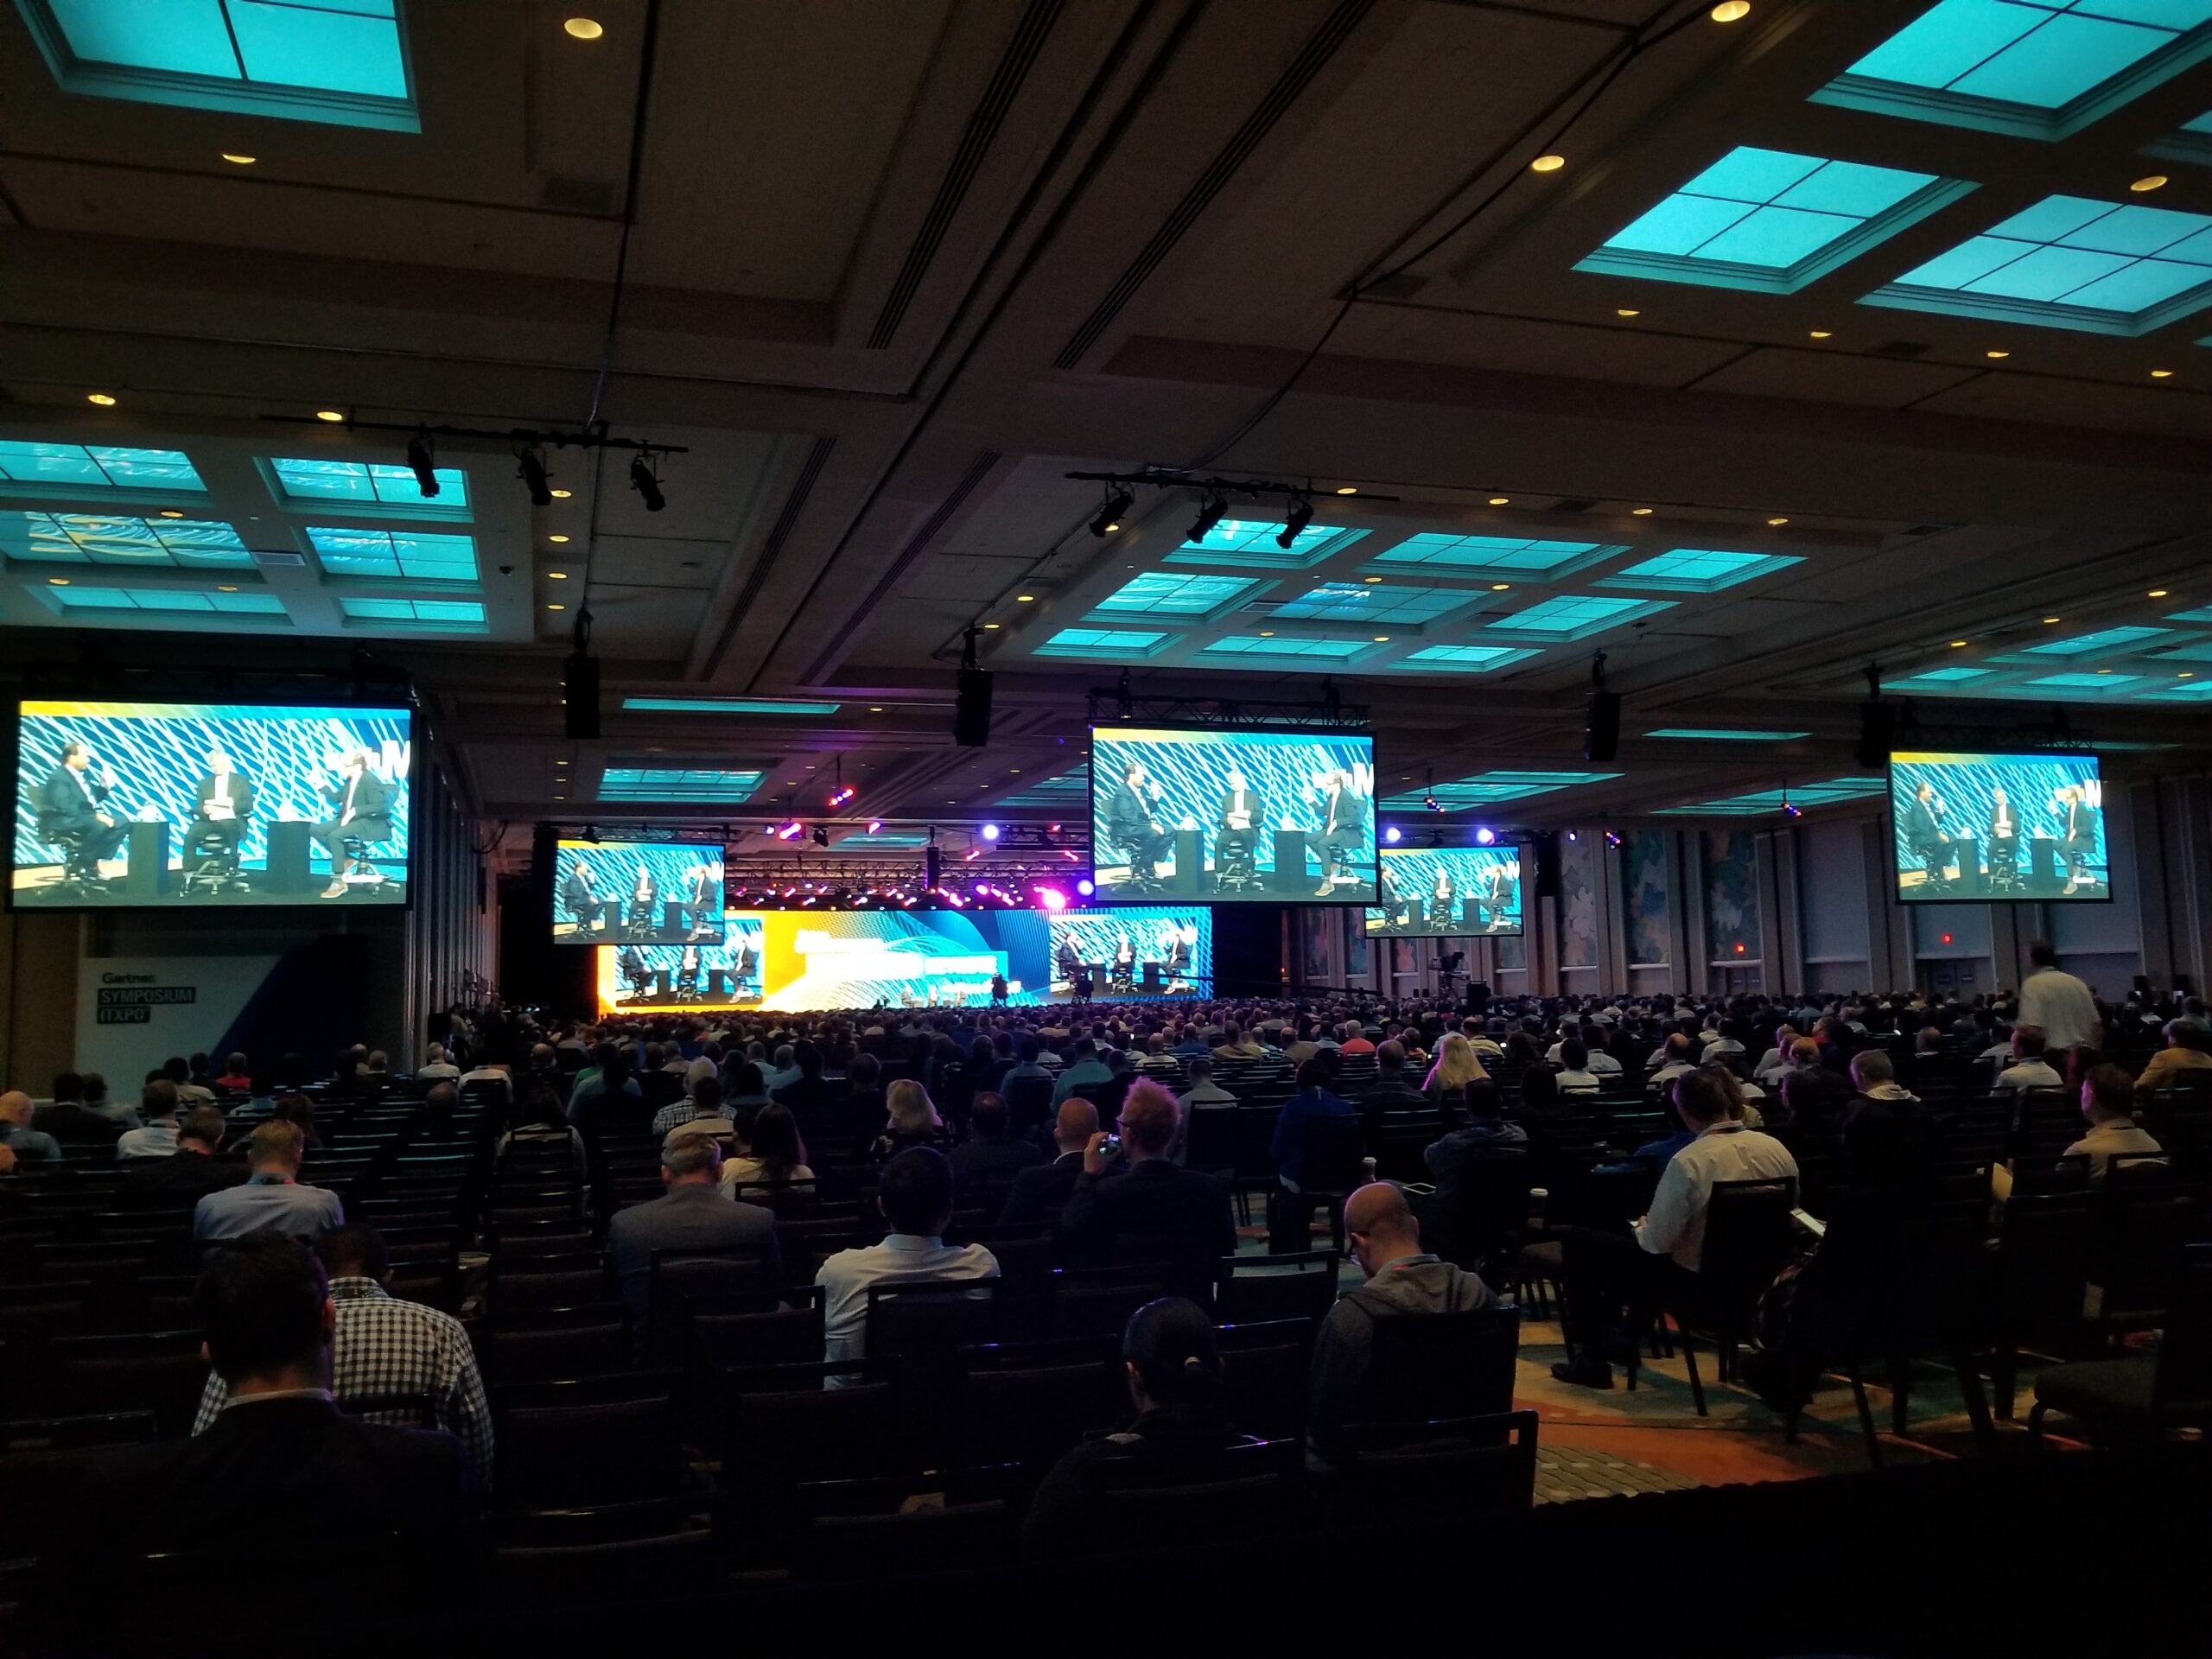 A conference event with a large audience, multiple screens showing a speaker, and a well-lit stage setting.